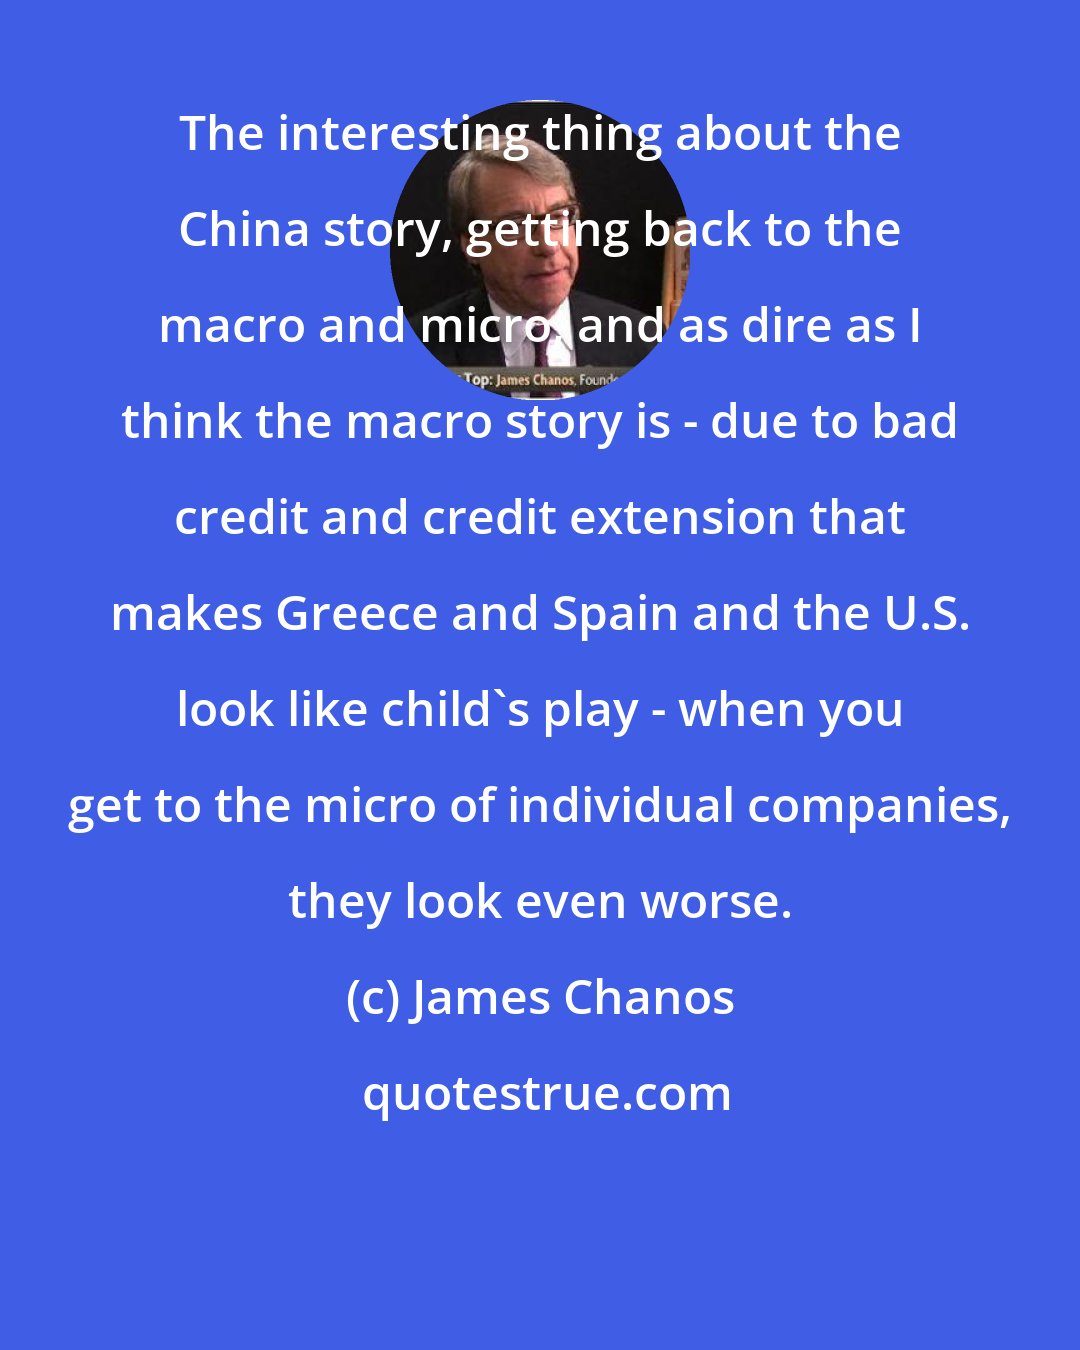 James Chanos: The interesting thing about the China story, getting back to the macro and micro, and as dire as I think the macro story is - due to bad credit and credit extension that makes Greece and Spain and the U.S. look like child's play - when you get to the micro of individual companies, they look even worse.